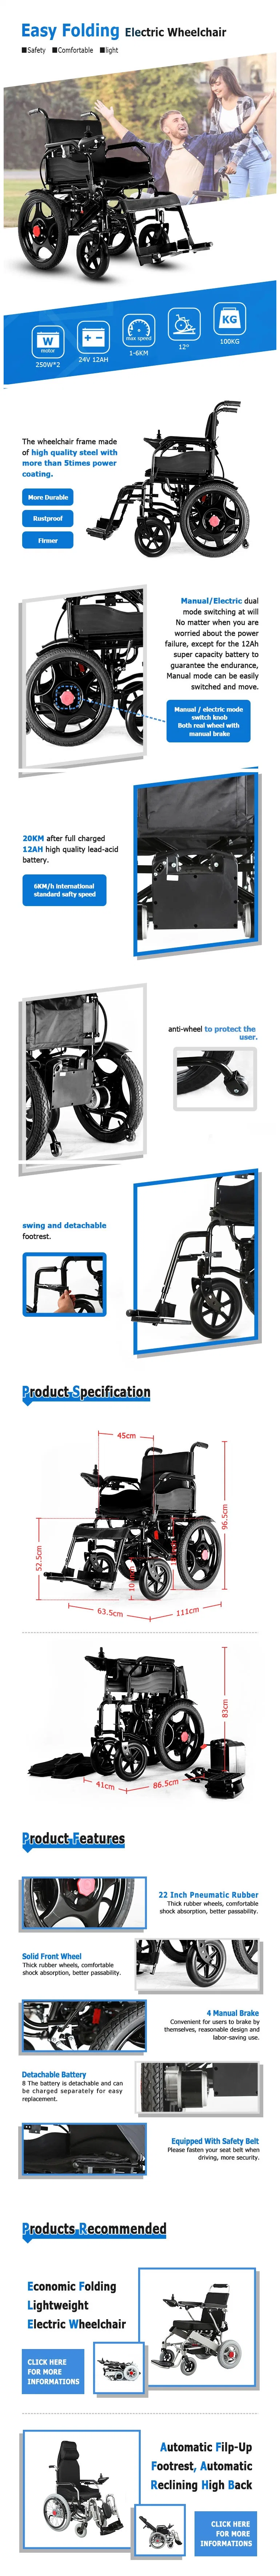 Silla De Rueda Cheapest Handicapped Folding Motorized Automatic Power Electric Wheelchair for Disabled